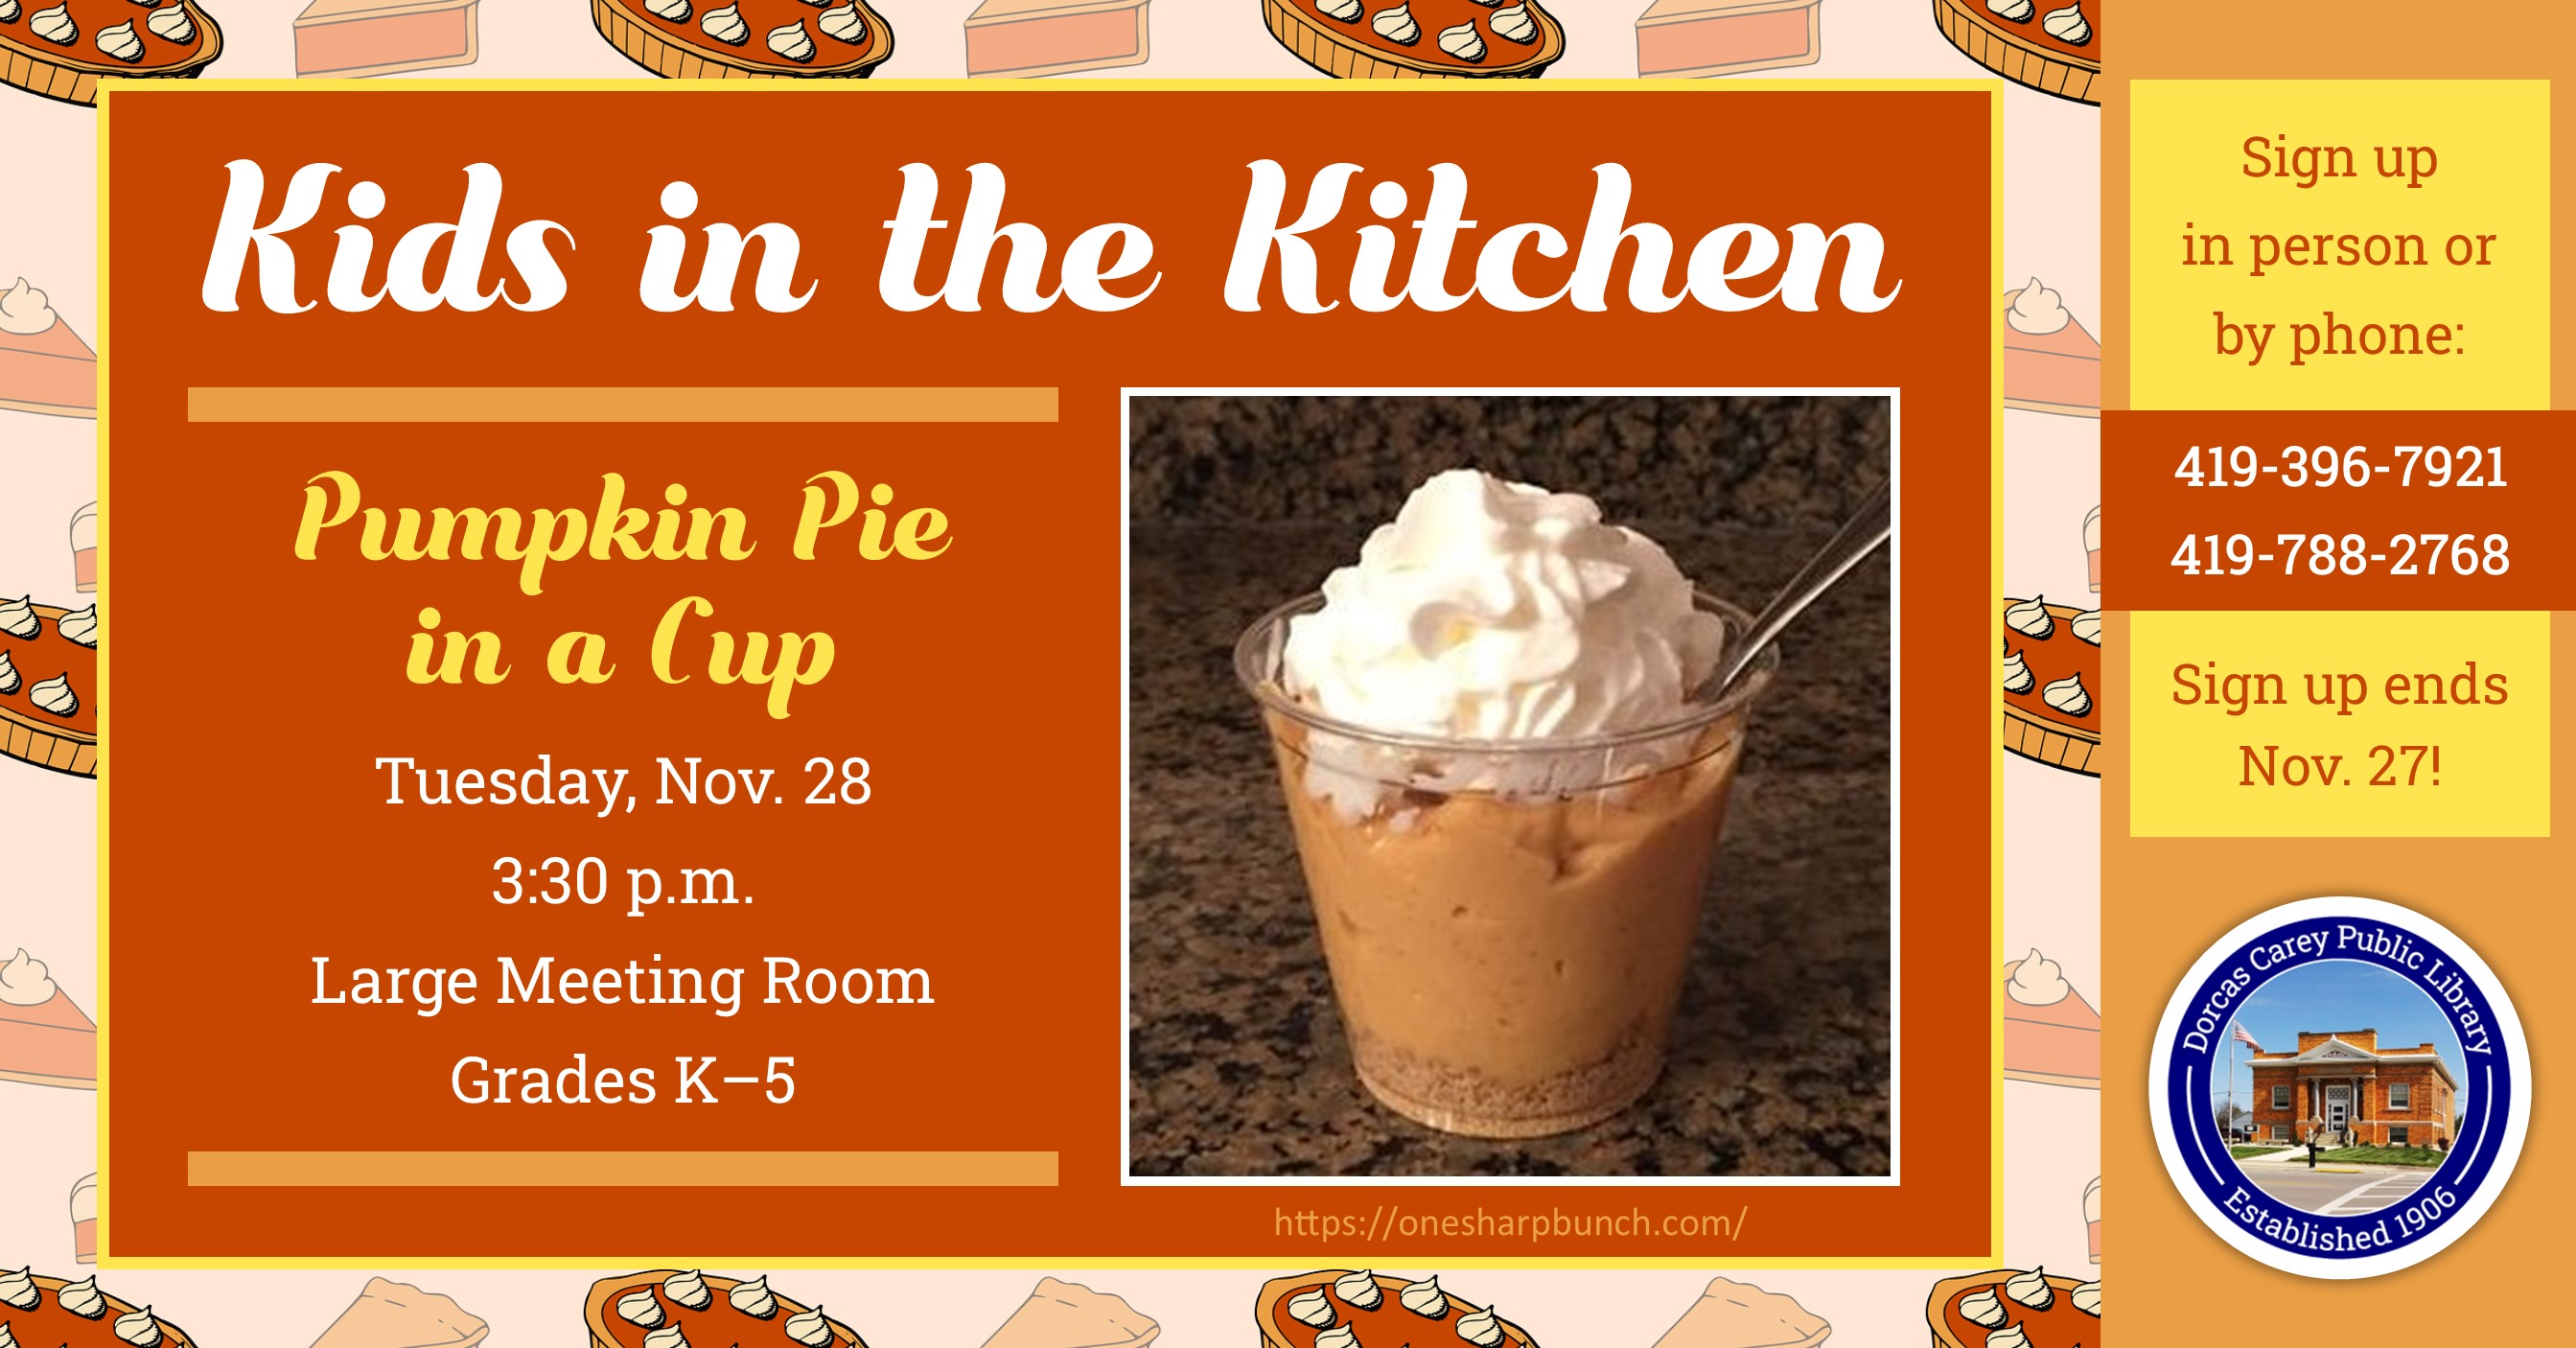 Come to the library on the fourth Tuesday of the month at 3:30 p.m. to learn how to make treats that can be shared with family and friends.  Children in kindergarten through grade 5 are encouraged to join the cooking fun!  This month’s recipe is Pumpkin Pie in a Cup.  Please sign up at the adult circulation desk or by phone at 419-396-7921 or 419-788-2768.